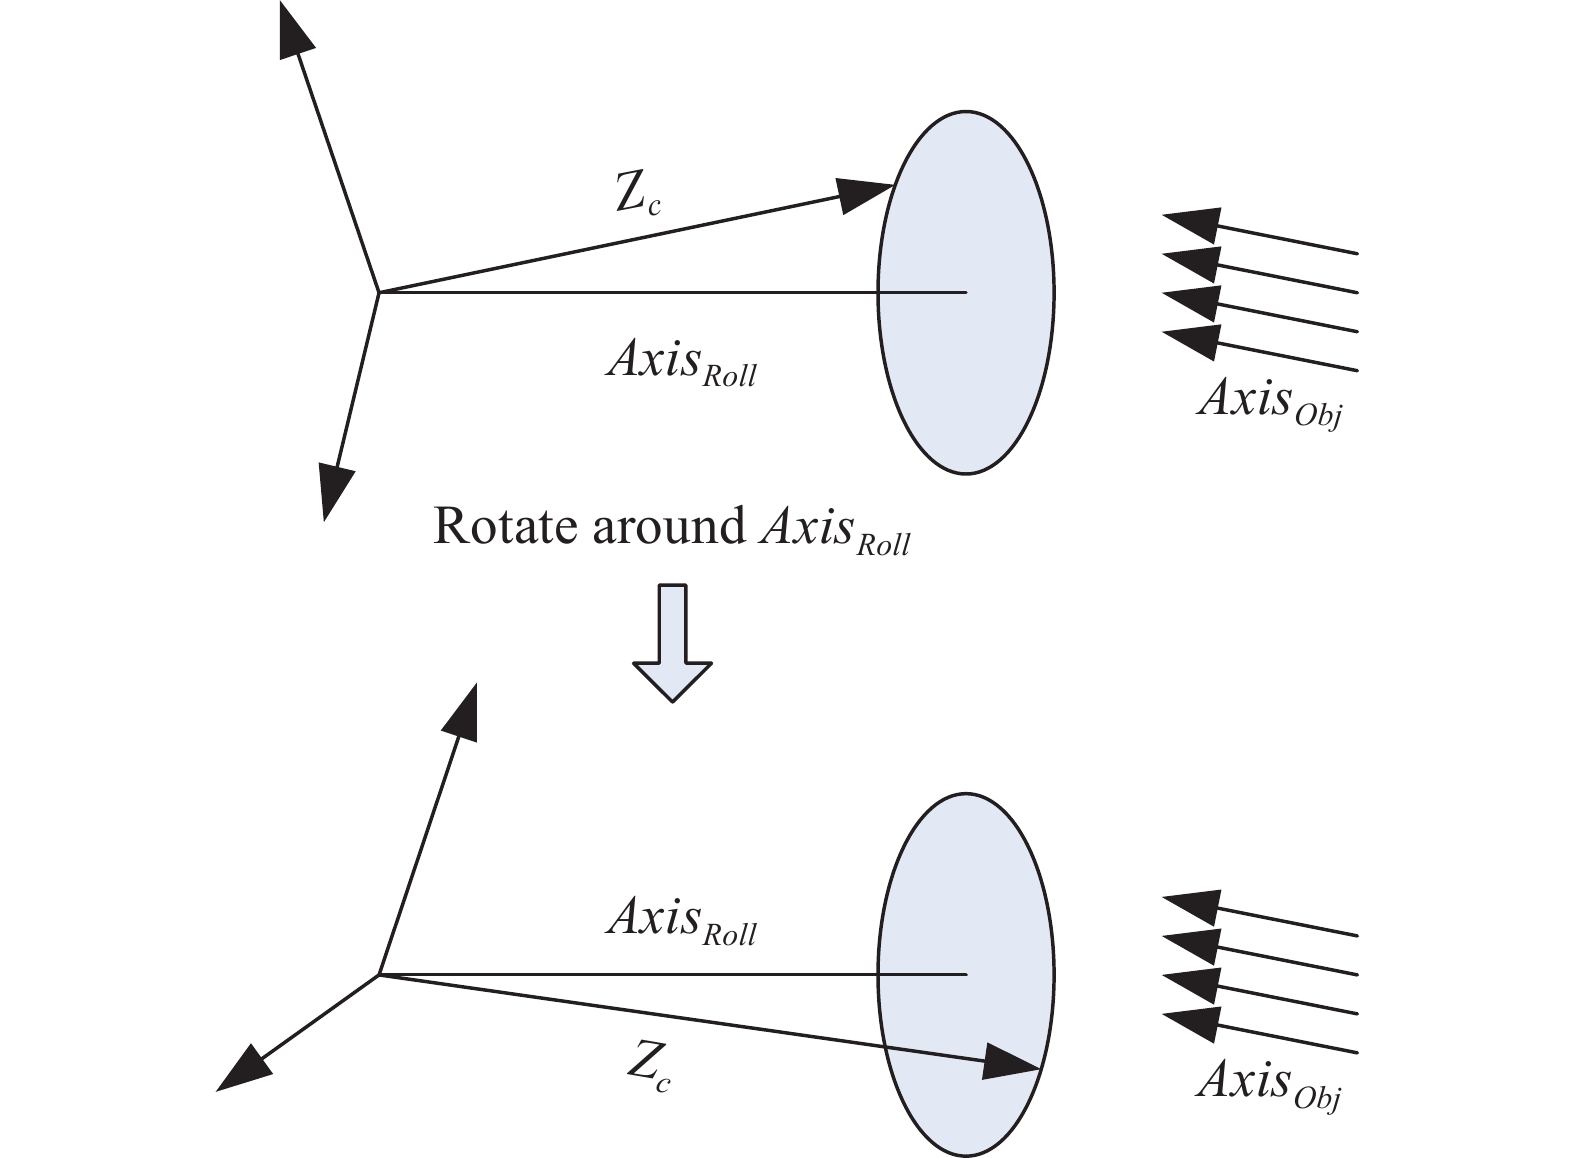 Schematic diagram of three axis relationship